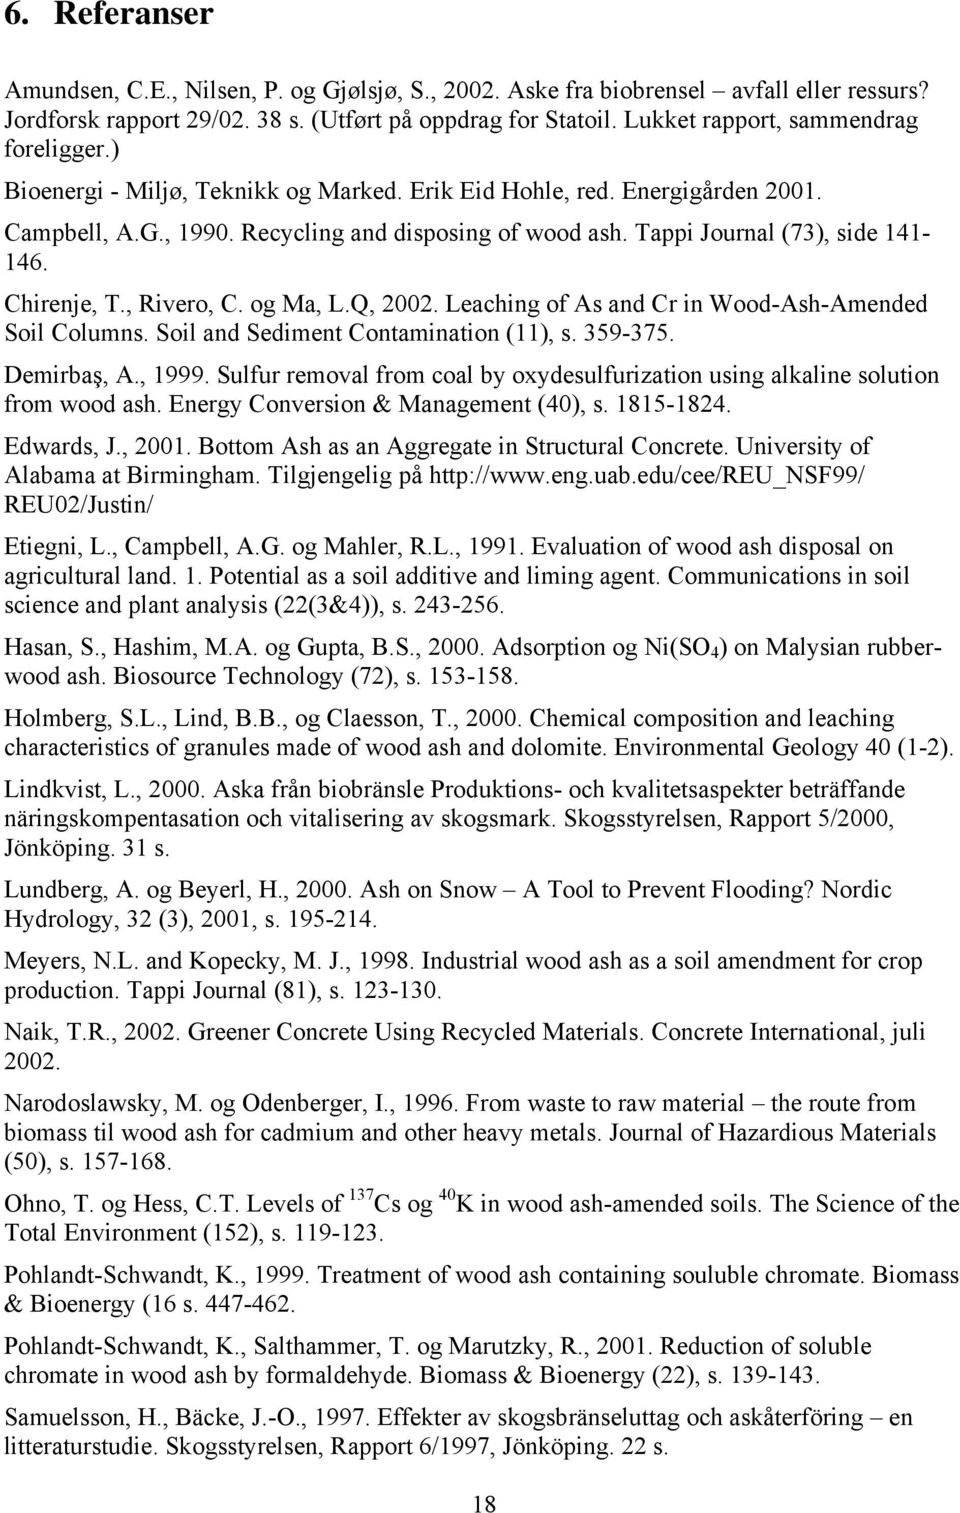 Tappi Journal (73), side 141-146. Chirenje, T., Rivero, C. og Ma, L.Q, 2002. Leaching of As and Cr in Wood-Ash-Amended Soil Columns. Soil and Sediment Contamination (11), s. 359-375. Demirbaş, A.